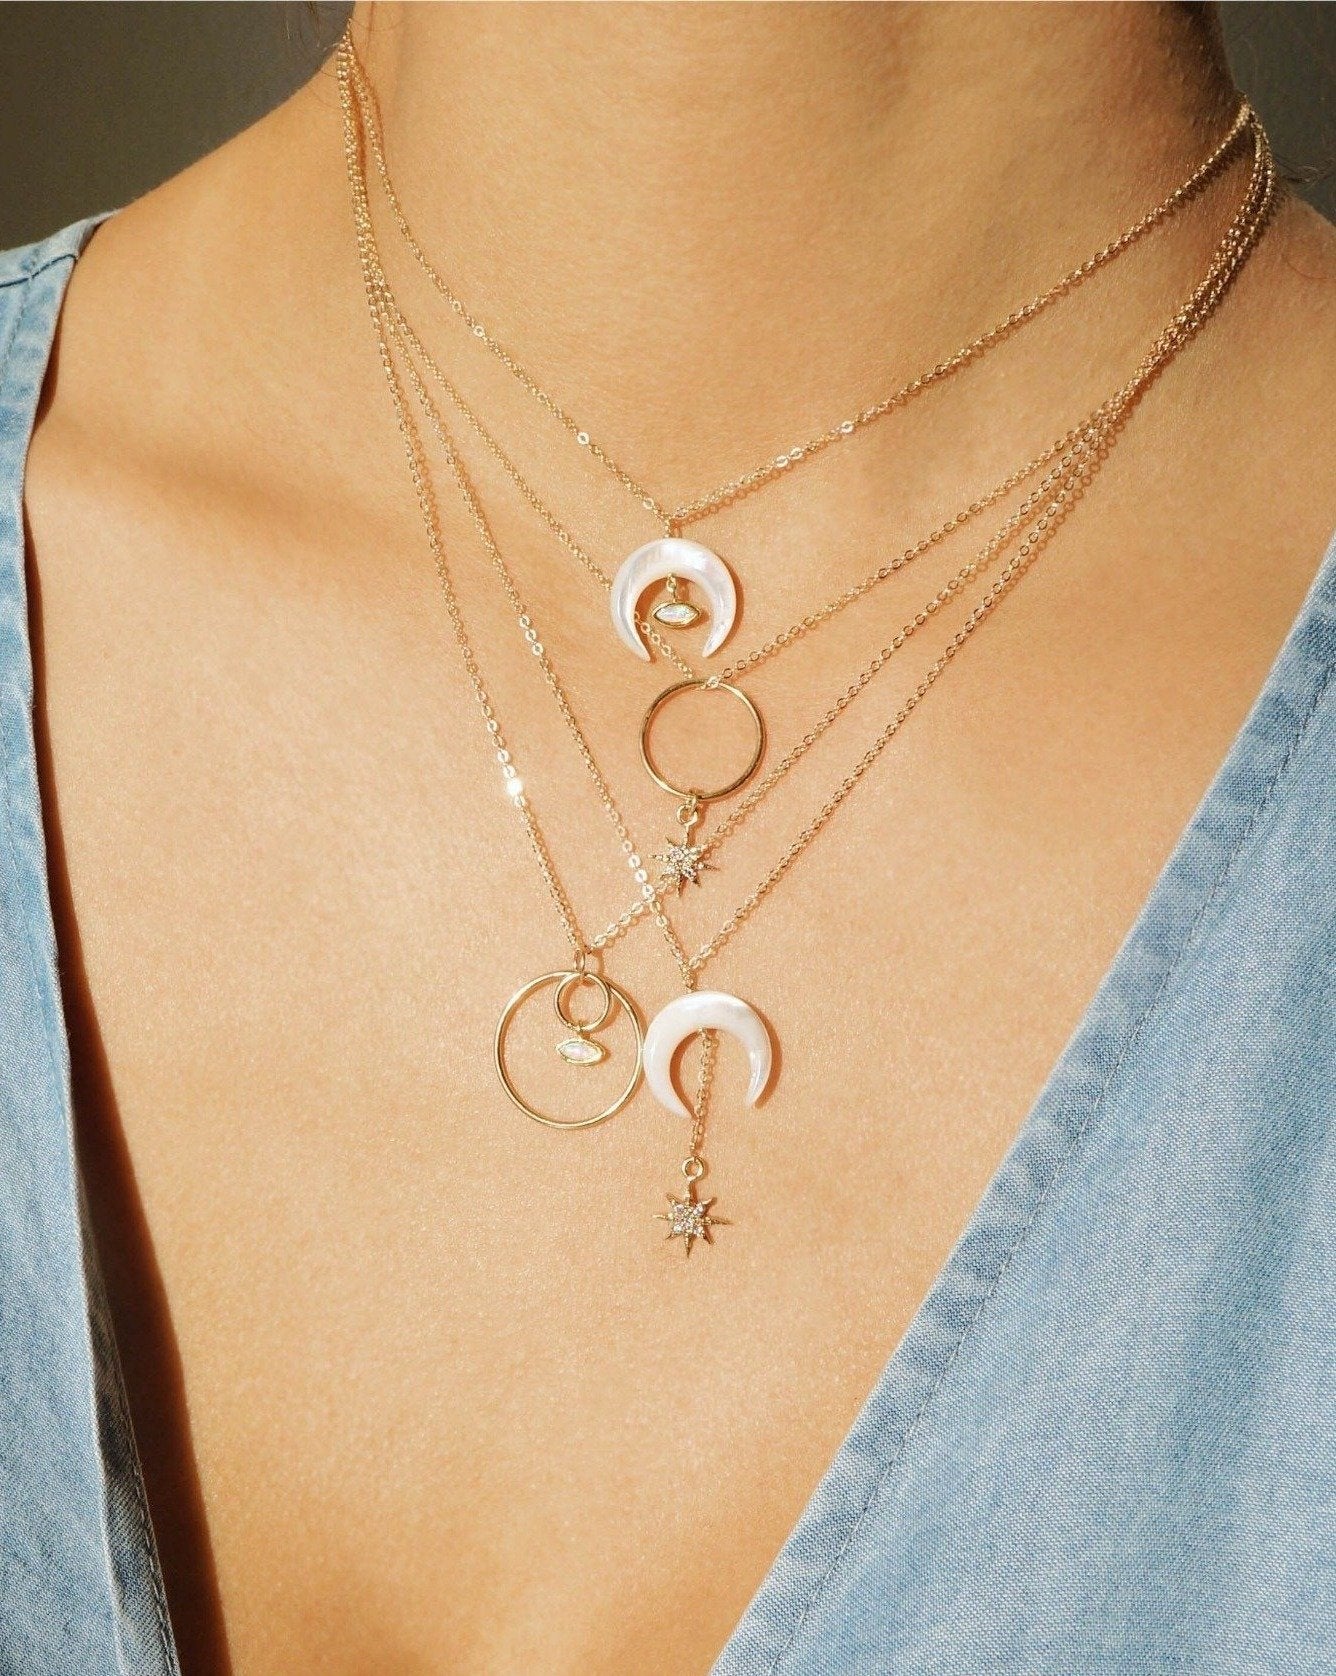 Stella Necklace by KOZAKH. A 16 to 18 inch adjustable length necklace, crafted in 14K Gold Filled, featuring a hand carved Mother of Pearl crescent moon charm and a Cubic Zirconia encrusted 6 point star.